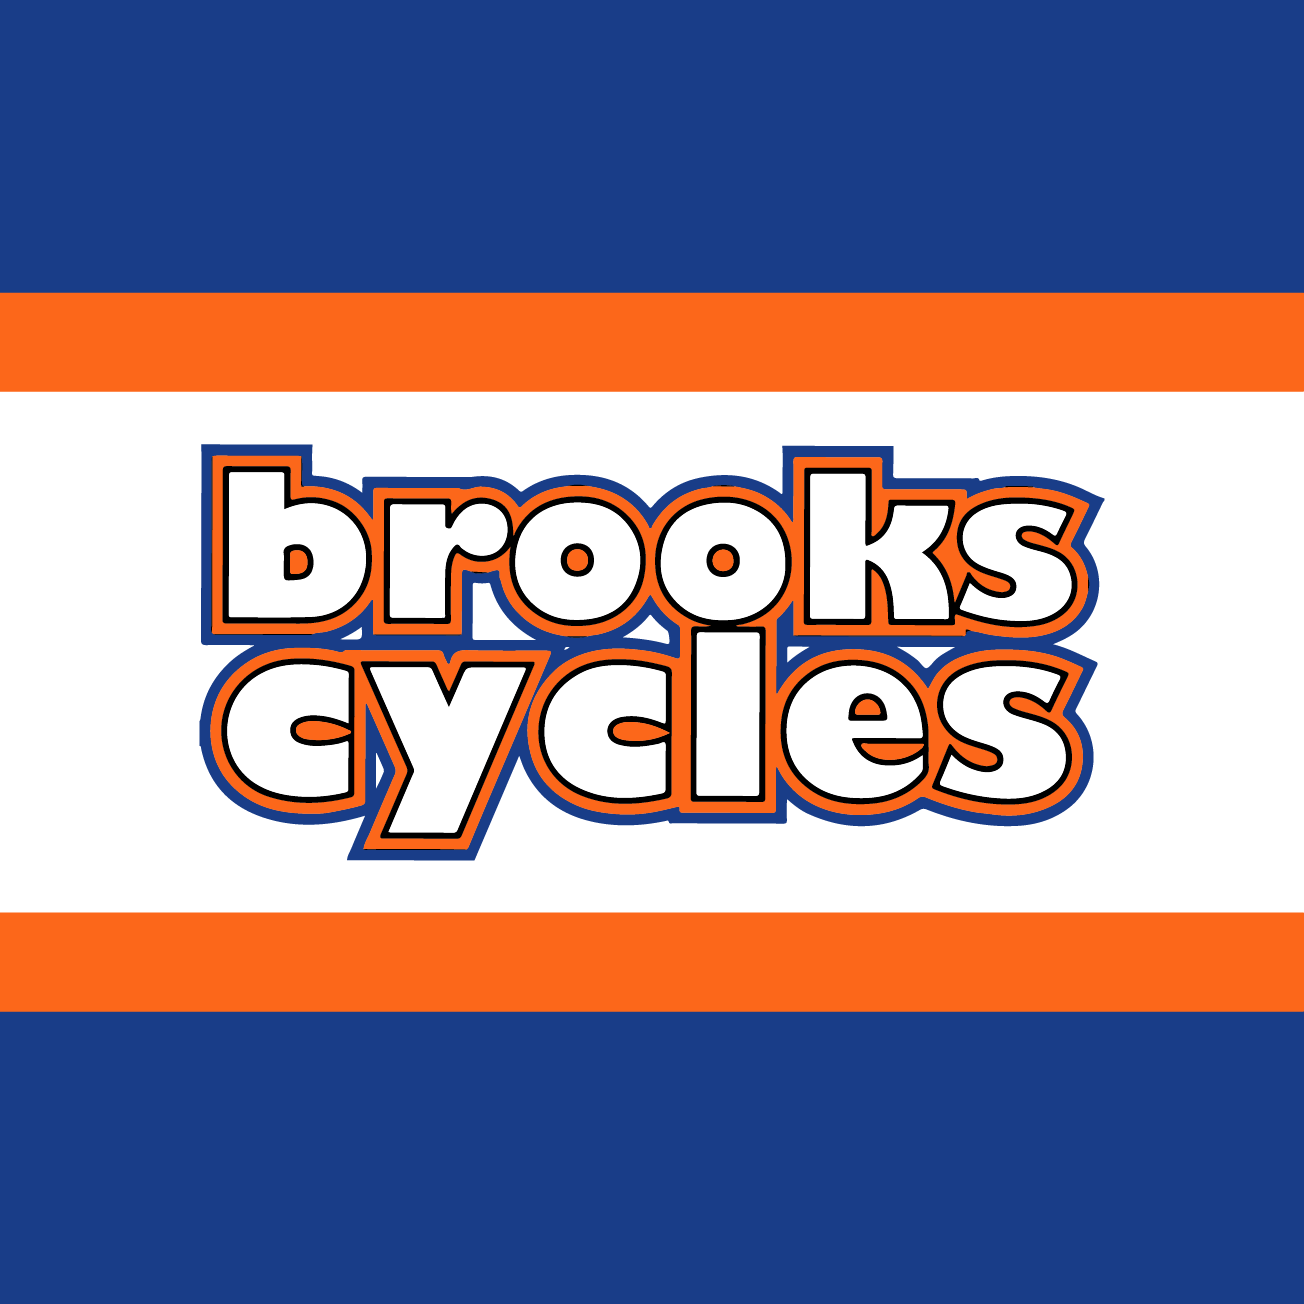 Club Image for BROOKS CYCLES